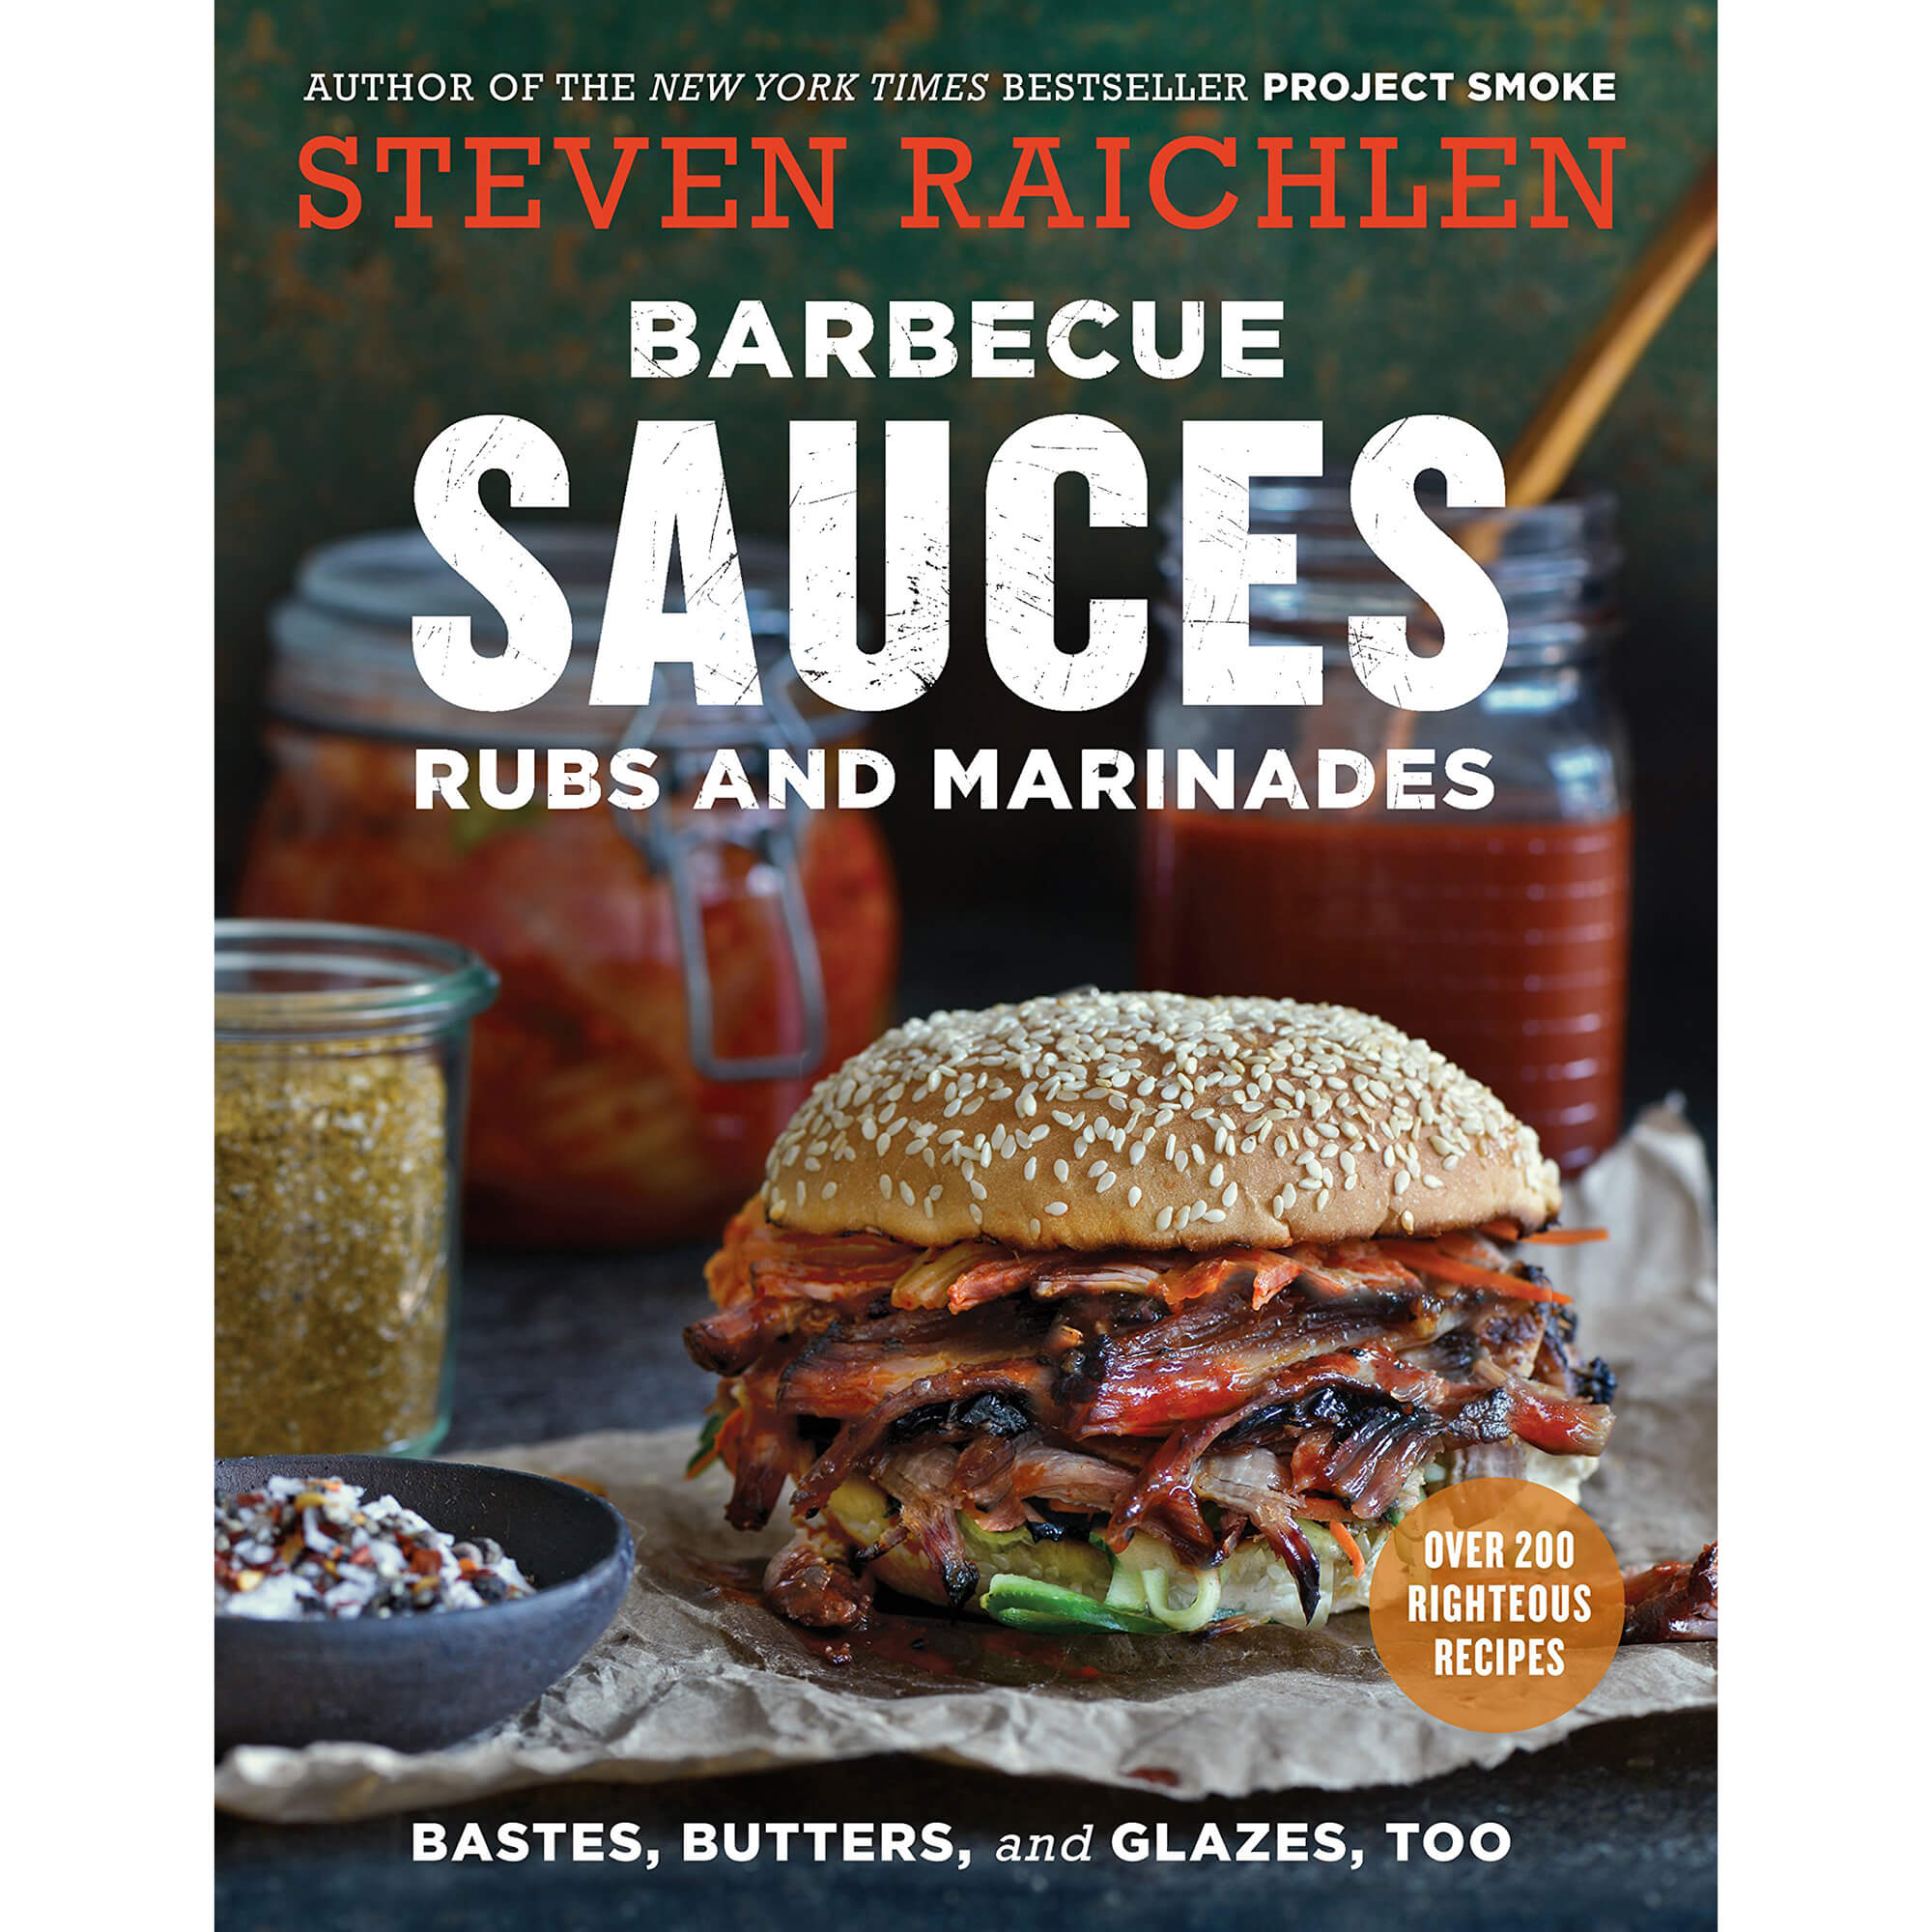 Barbecue Sauces, Rubs, and Marinades front cover.